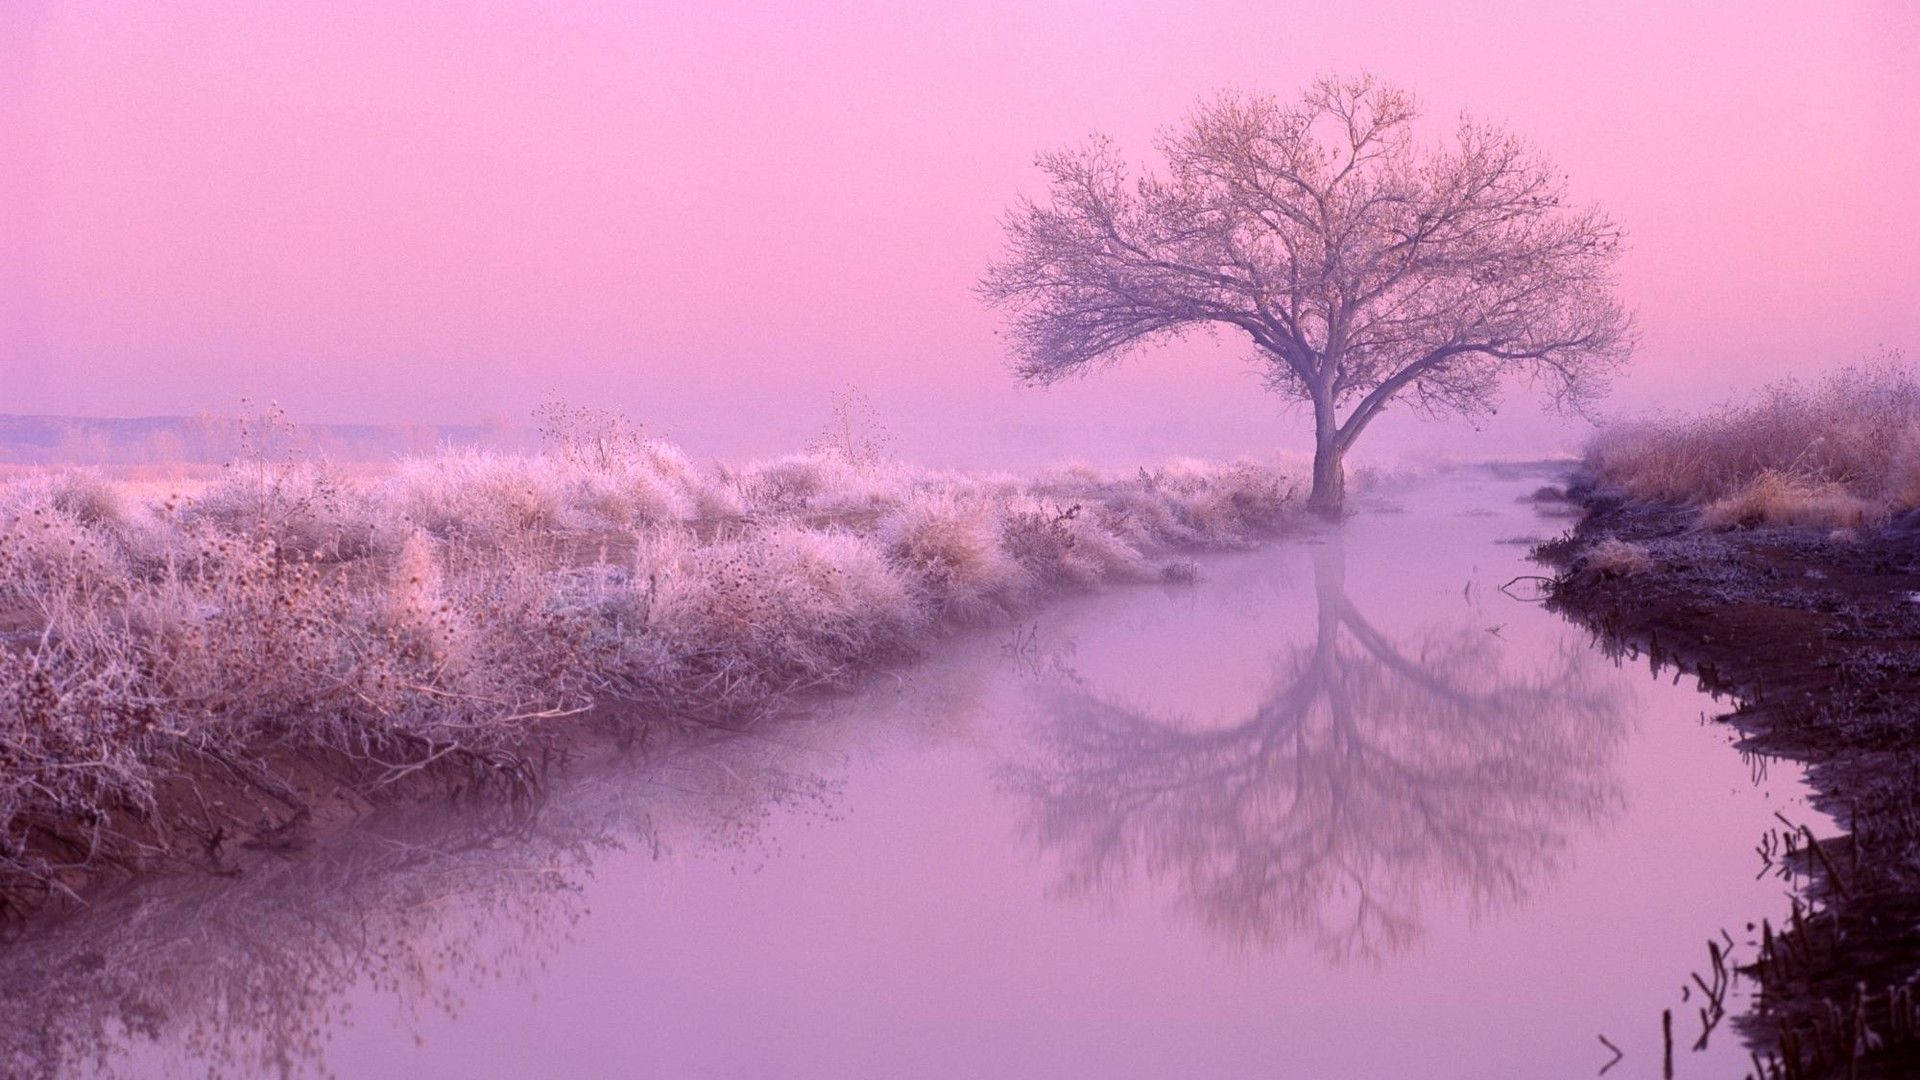 Aesthetic Pink Desktop River And Tree